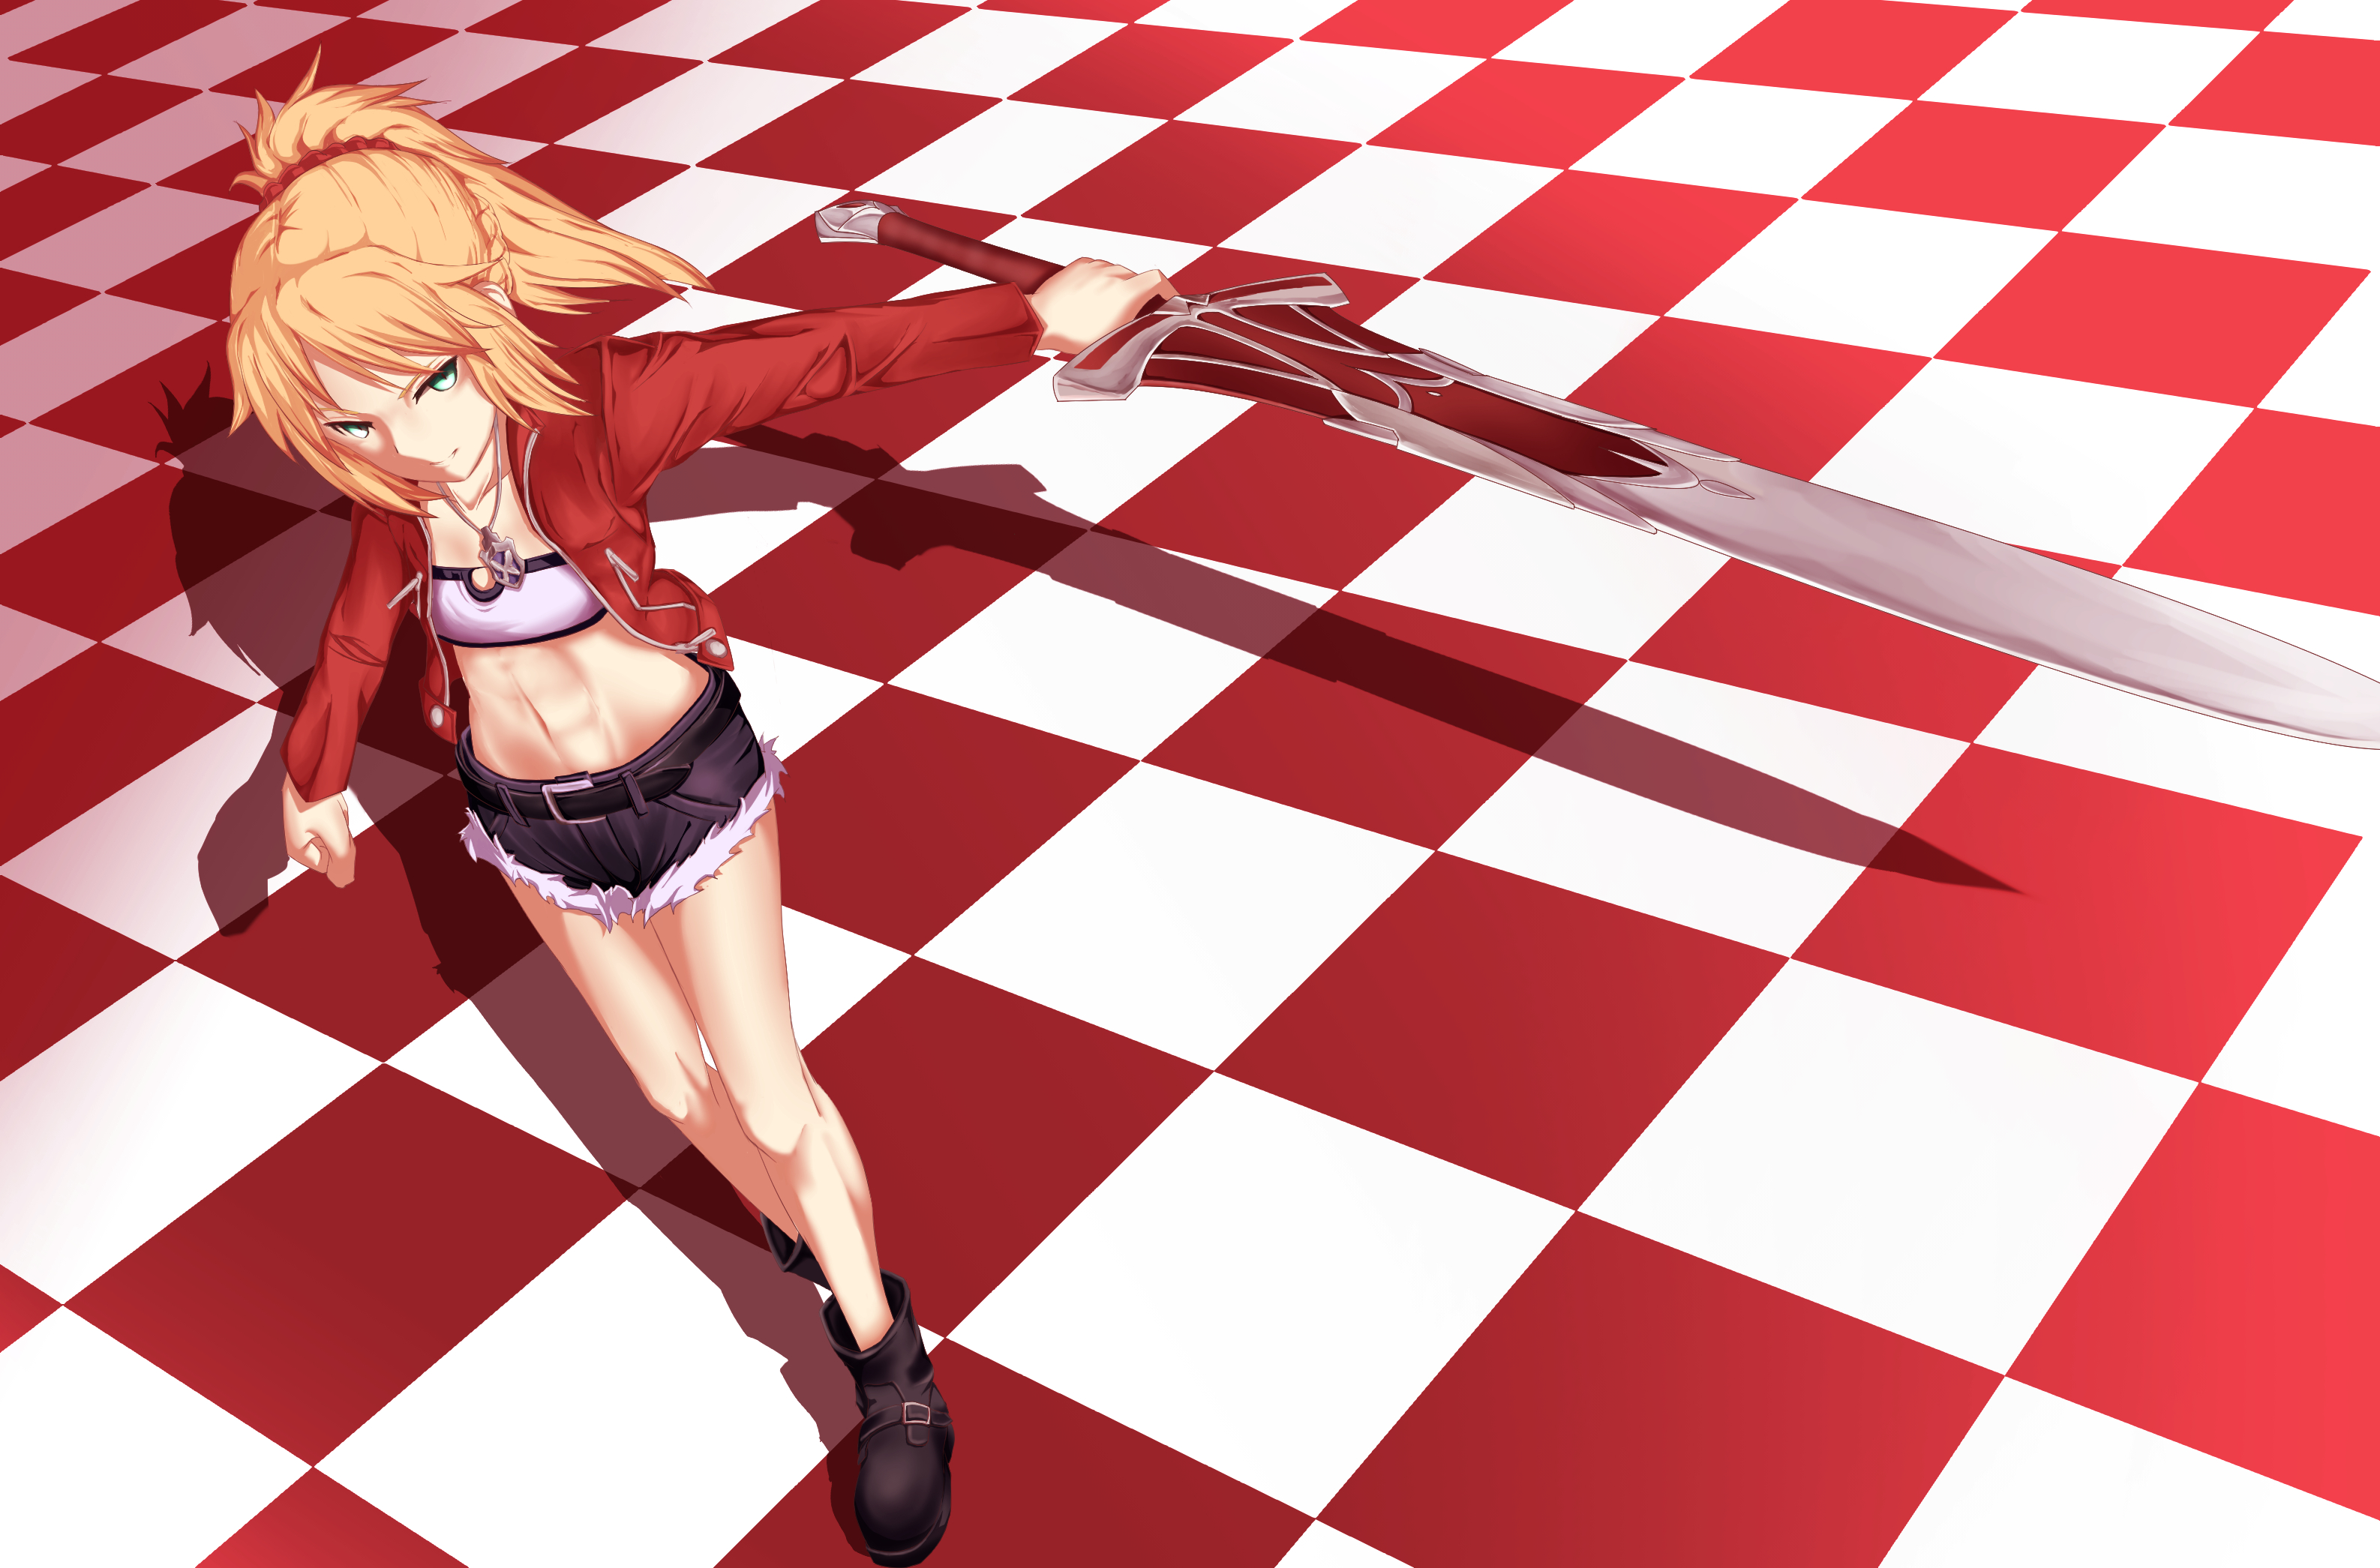 Mordred Fate Apocrypha Saber Of Red Fate Apocrypha 3173x2091